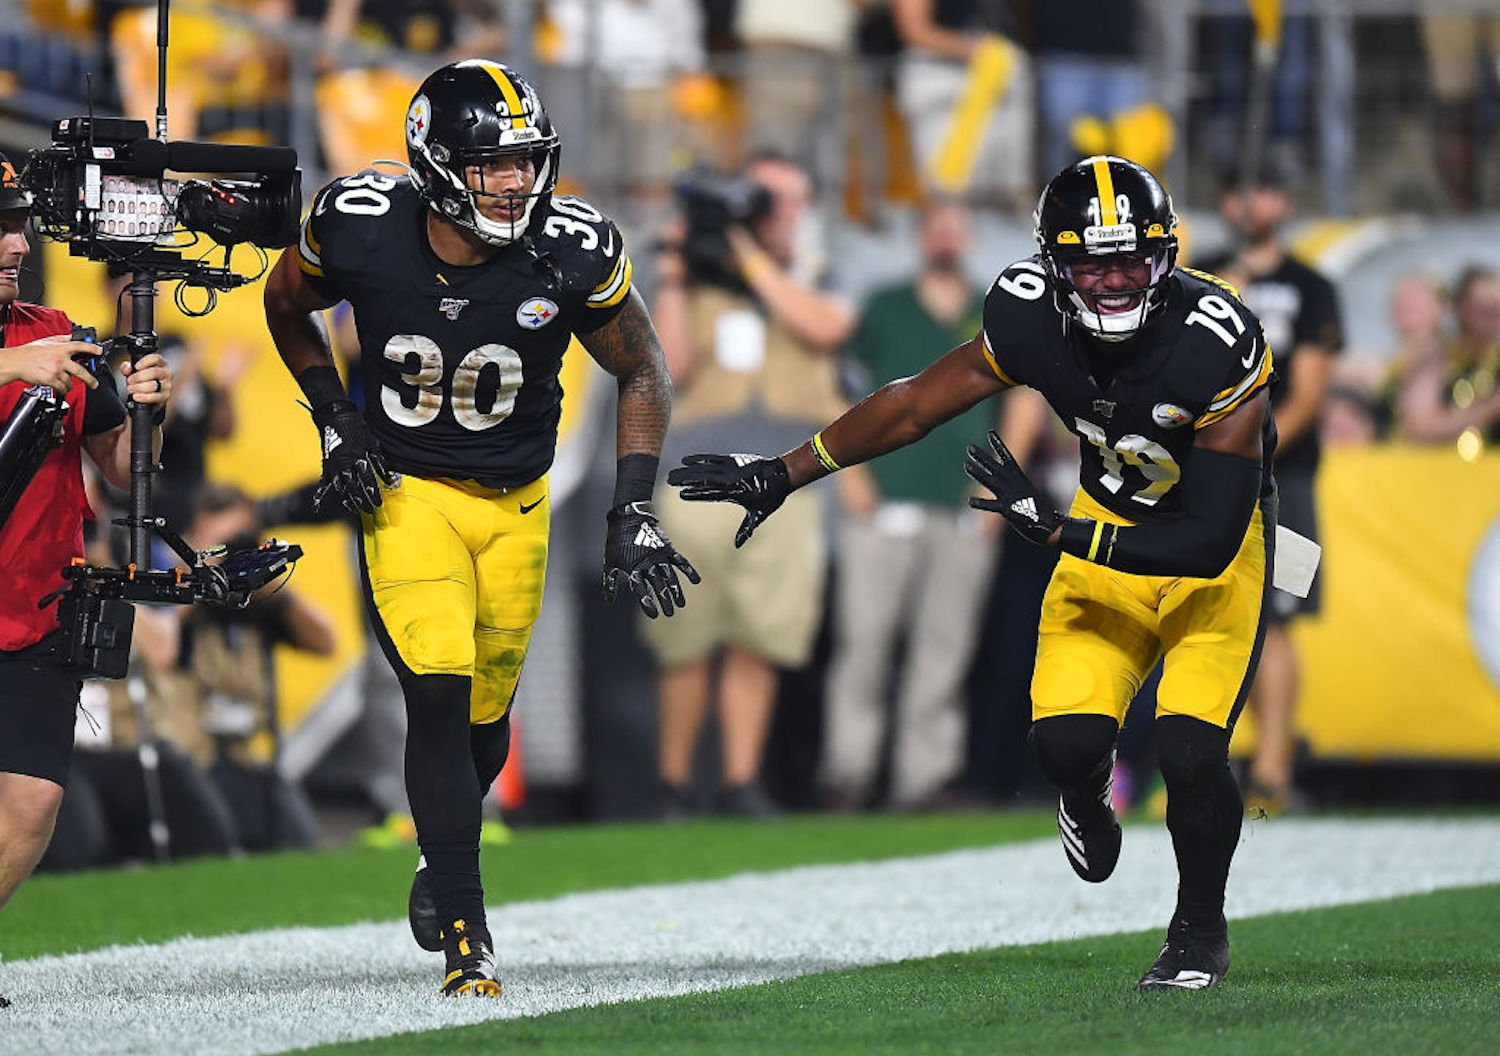 Steelers RB James Conner and WR JuJu Smith-Schuster were each fined $5,000 for wearing their socks too low on Sunday.